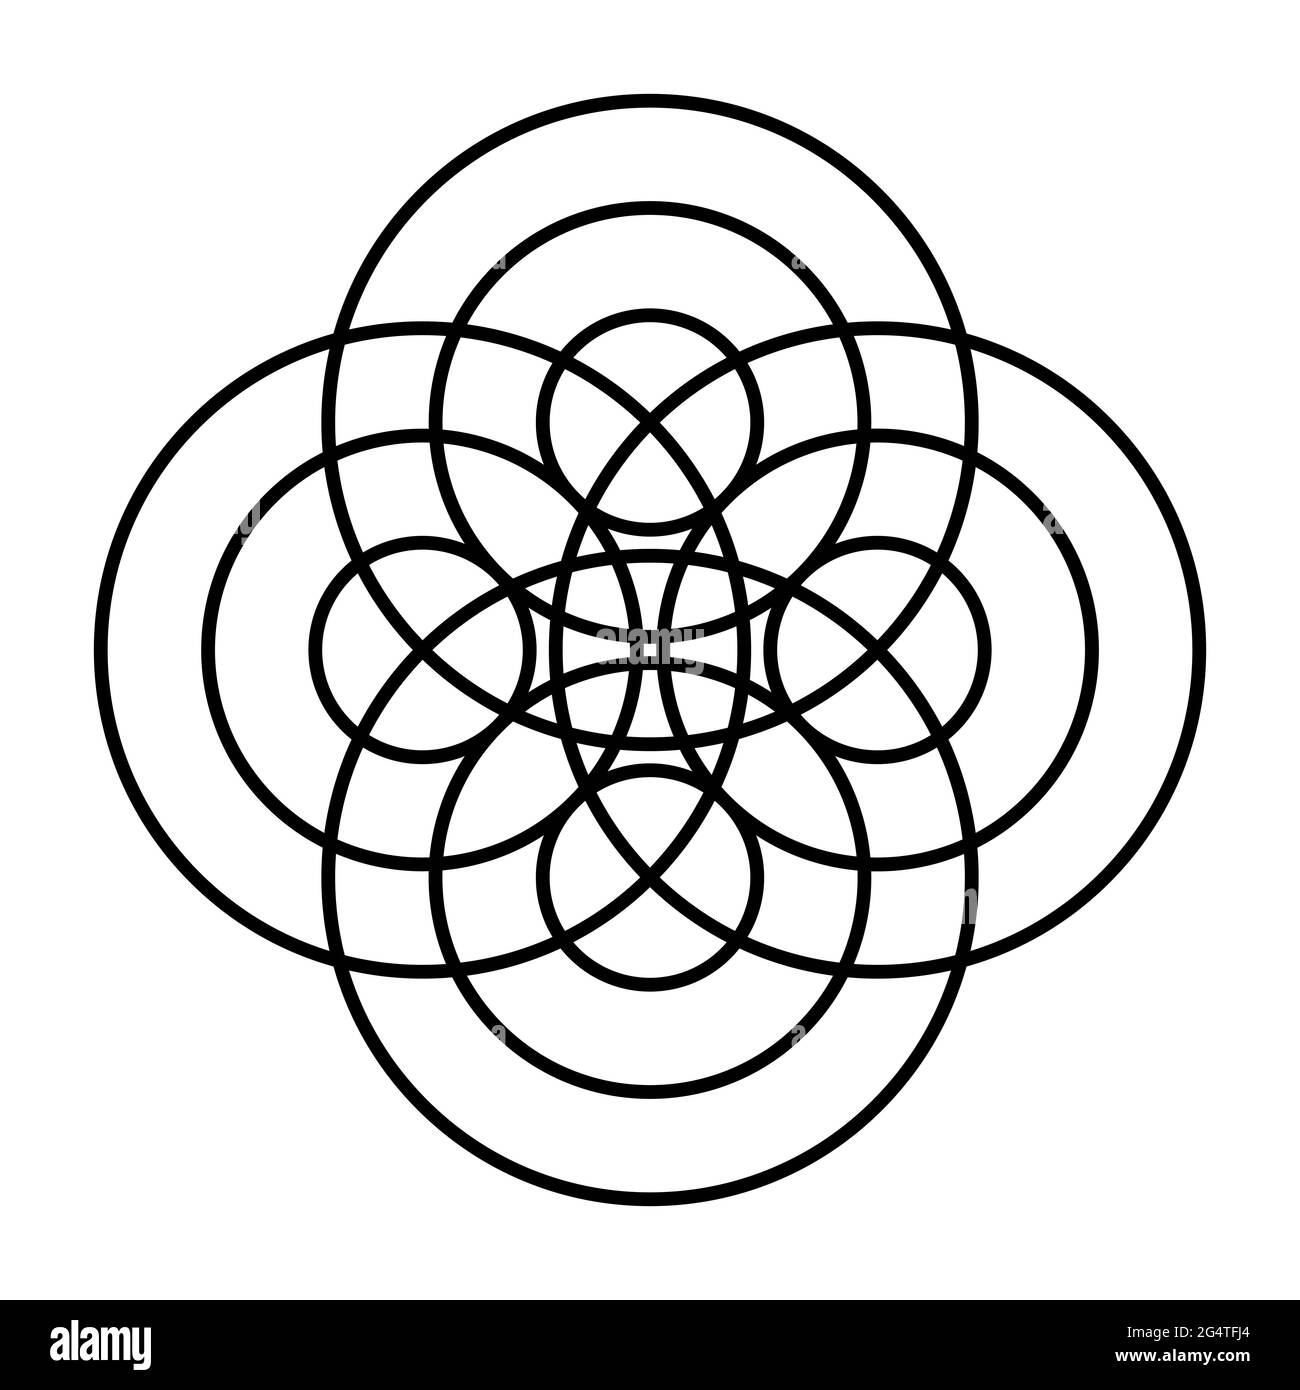 Symbol made of concentric circles. At four different points, three waves spread out concentrically, similar to water waves, and result in a mandala. Stock Photo